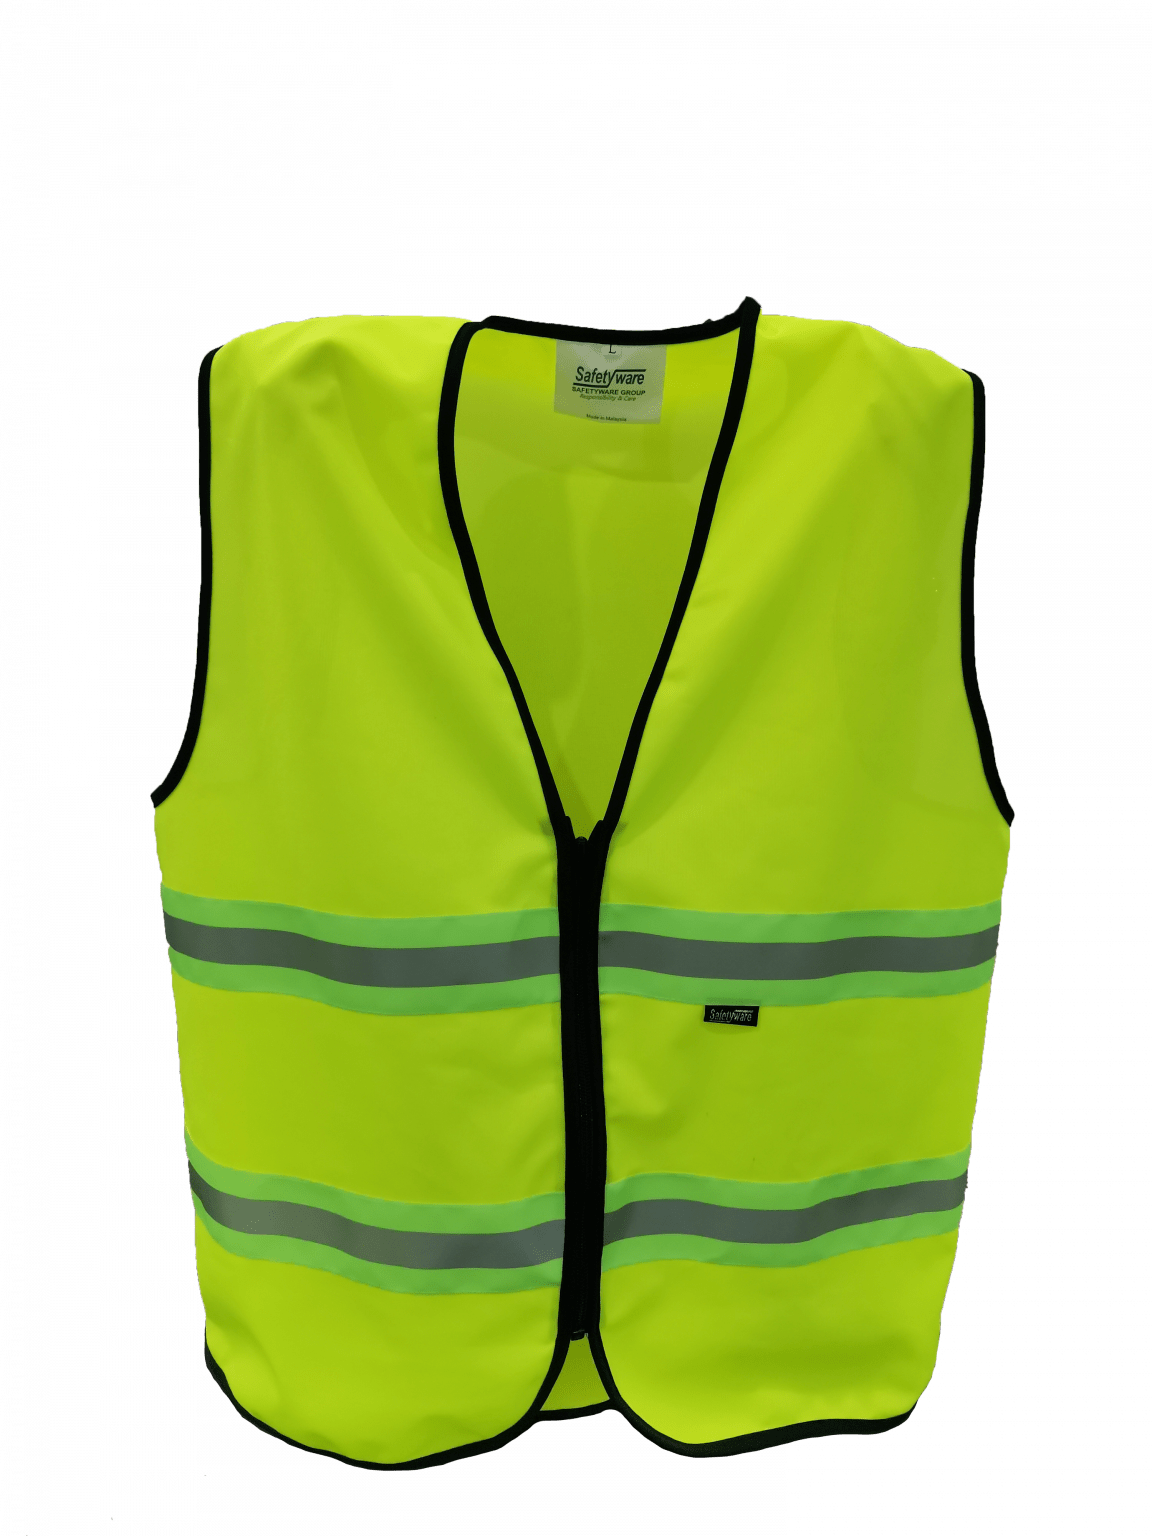 Safetyware Triple Protection Safety Vest Safetyware Sdn Bhd